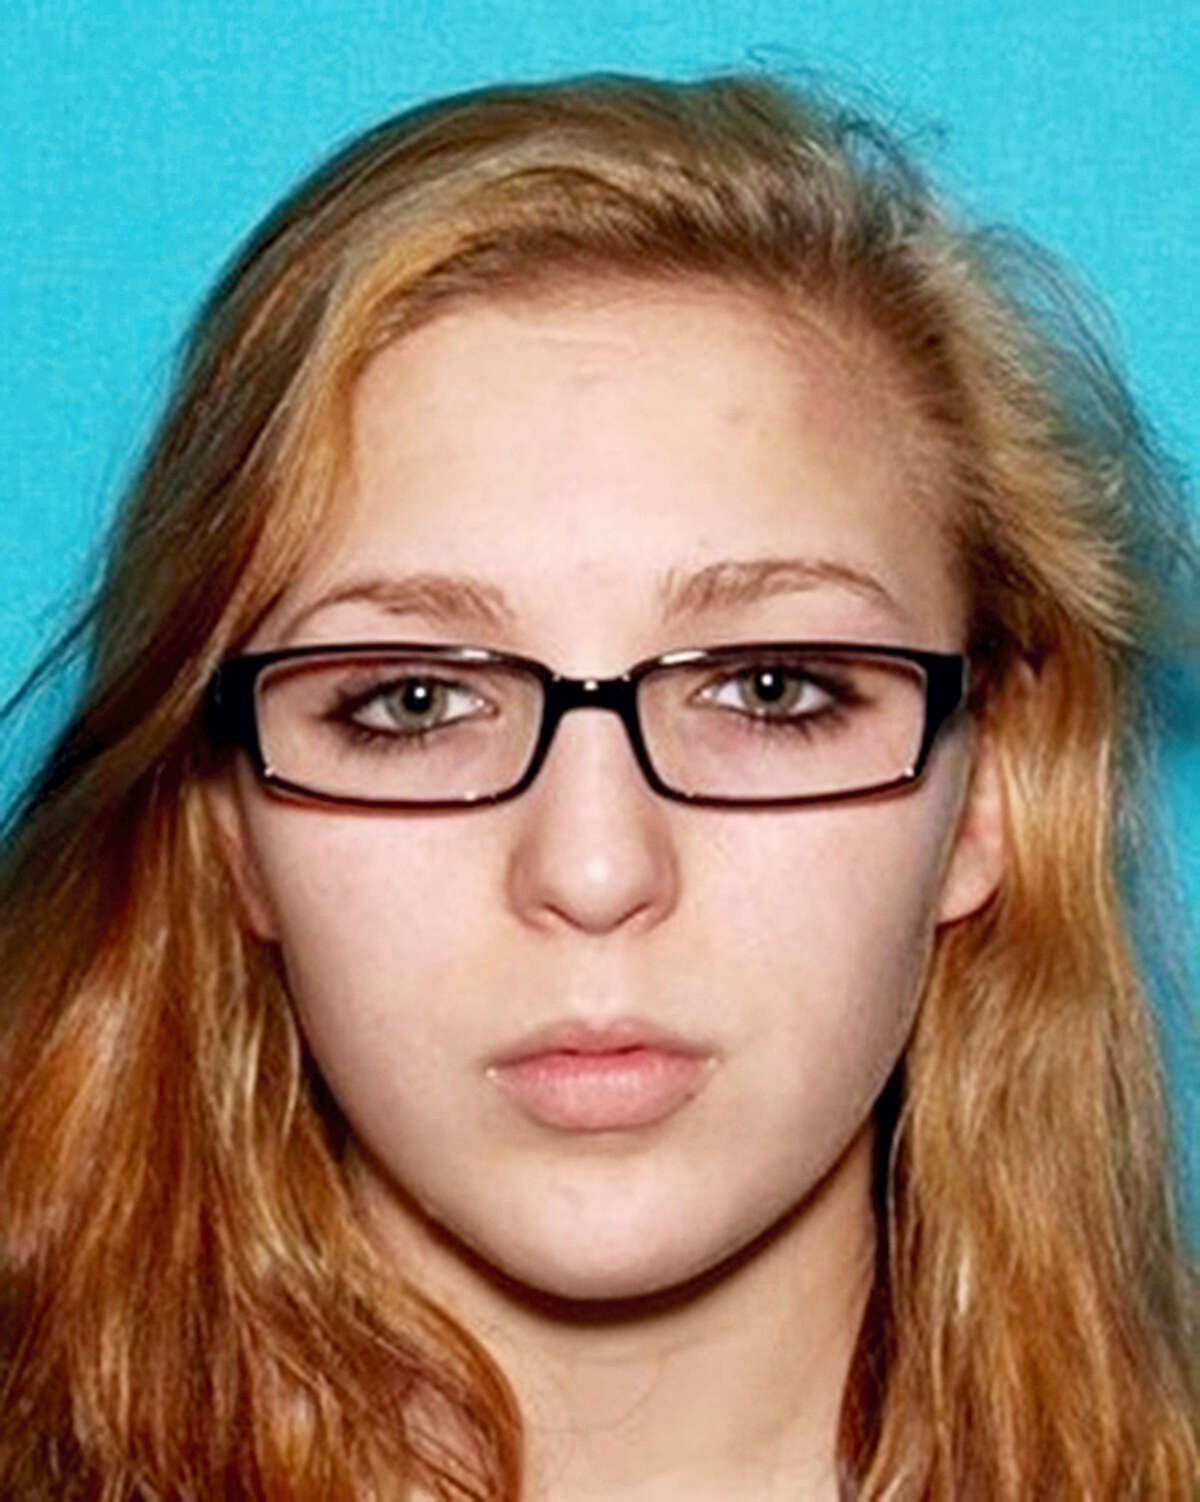 In this undated file photo released by the Tennessee Bureau of Investigations shows Elizabeth Thomas in Tennessee. Tennessee authorities say there’s been a confirmed sighting of Thomas, a 15-year-old girl who disappeared more than two weeks ago with her 50-year-old teacher. The Tennessee Bureau of Investigation said it remains “extremely concerned” about the well-being of Thomas, a high school student who was last seen Monday, March, 13, 2017, in Columbia, Tenn.